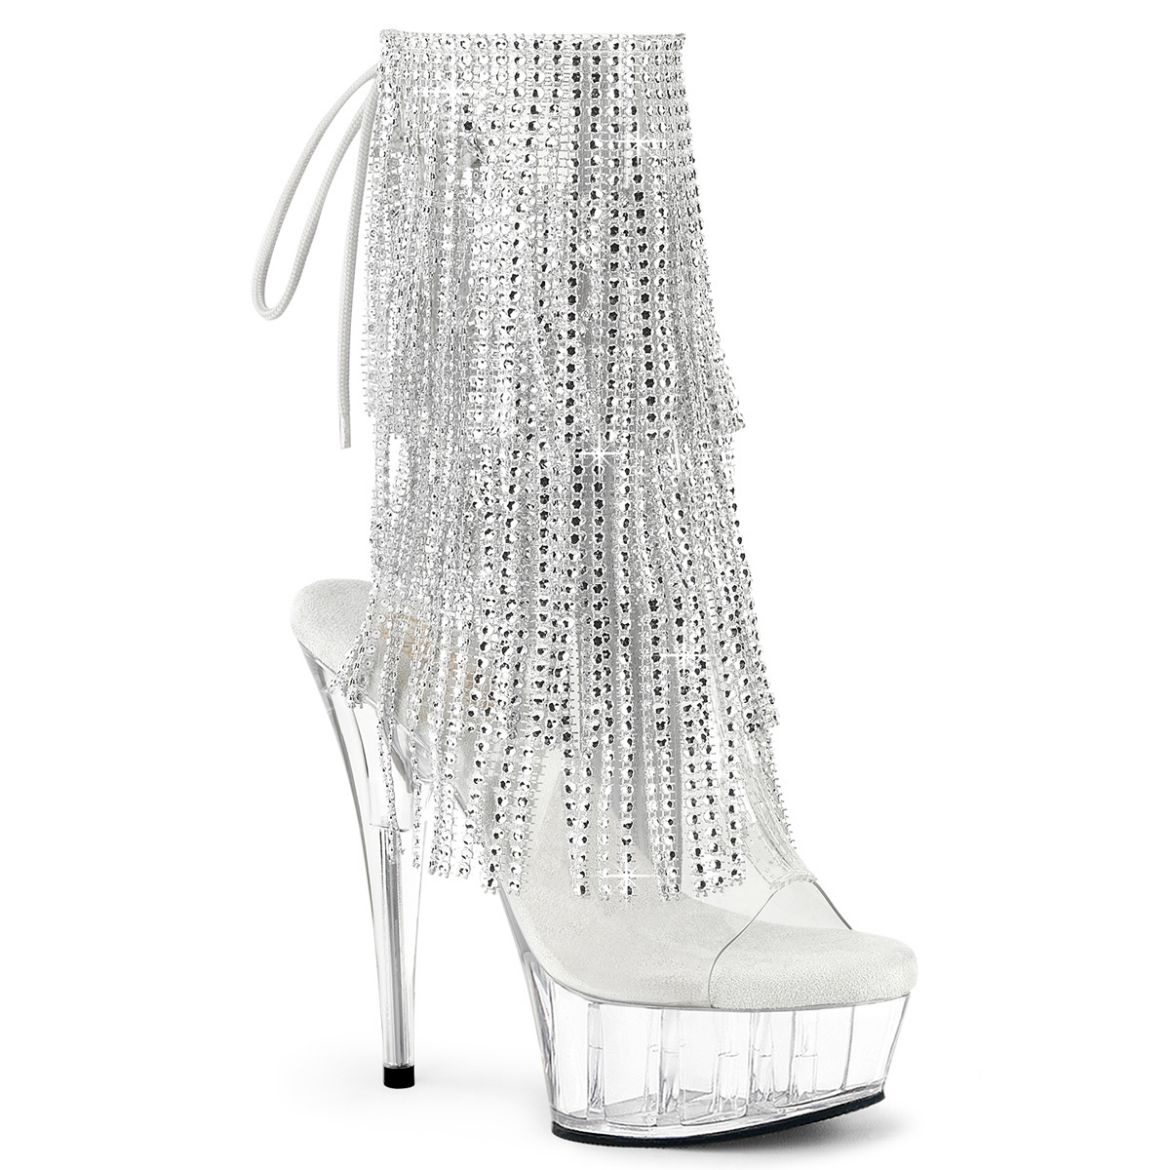 Product image of Pleaser DELIGHT-1017RSF Clr-Slv/Clr 6 Inch Heel 1 3/4 Inch PF Open Toe/Heel Lace-Up Fringe Ankle Boot